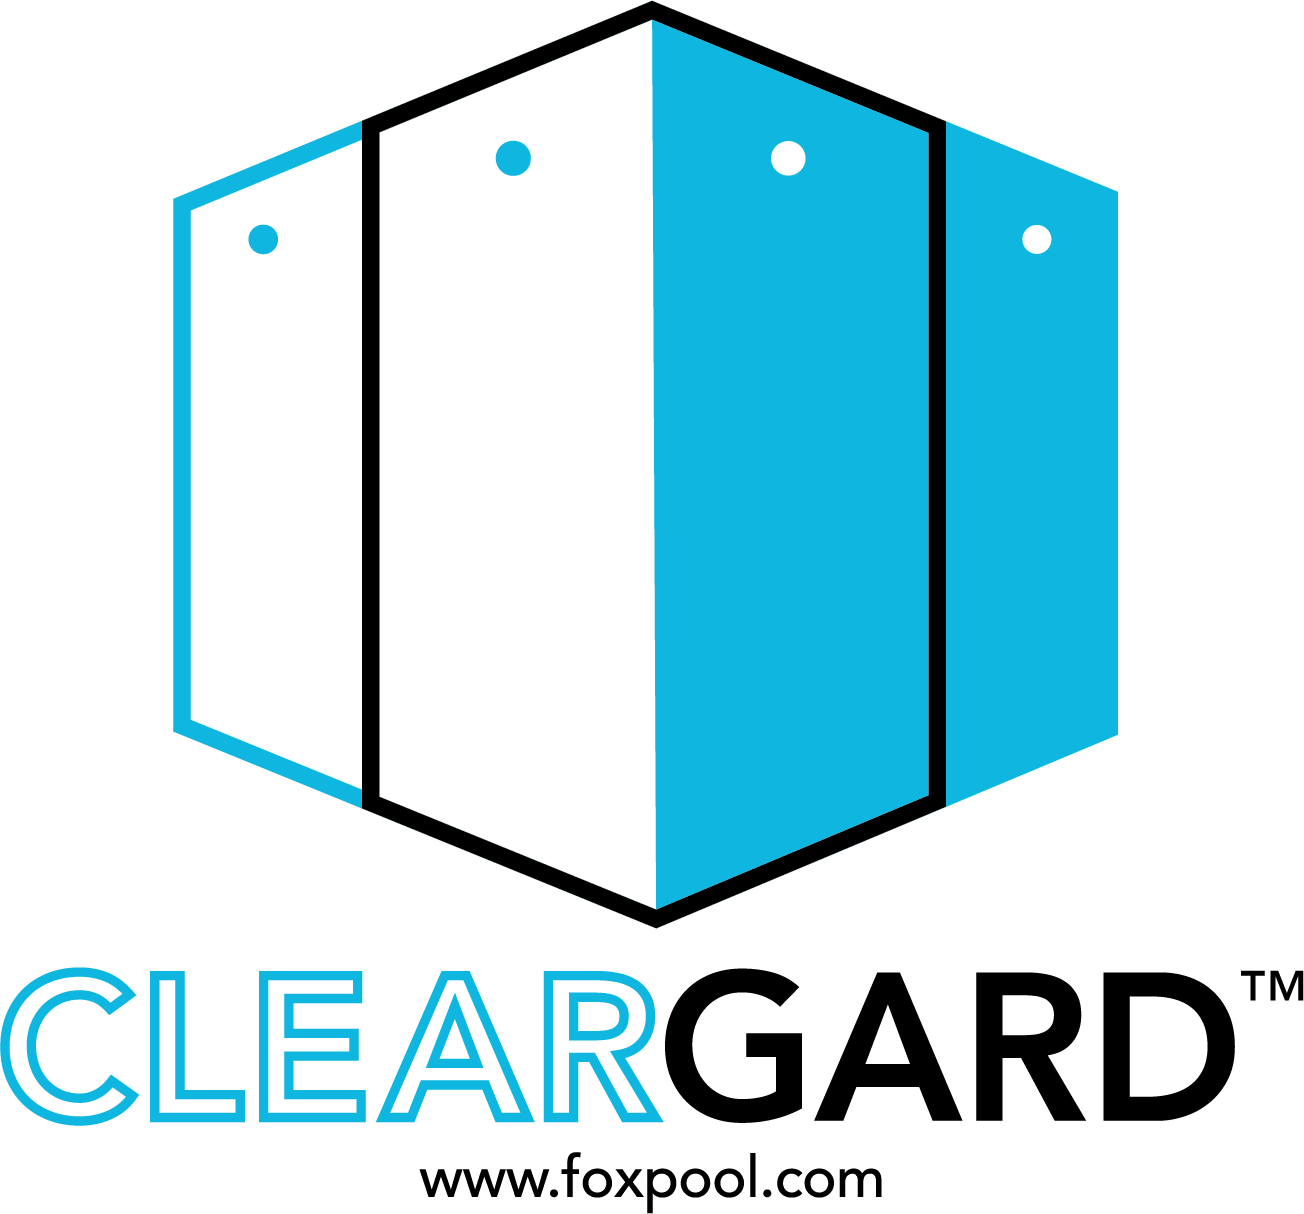 NEW by Fox Pool: CLEARGARD